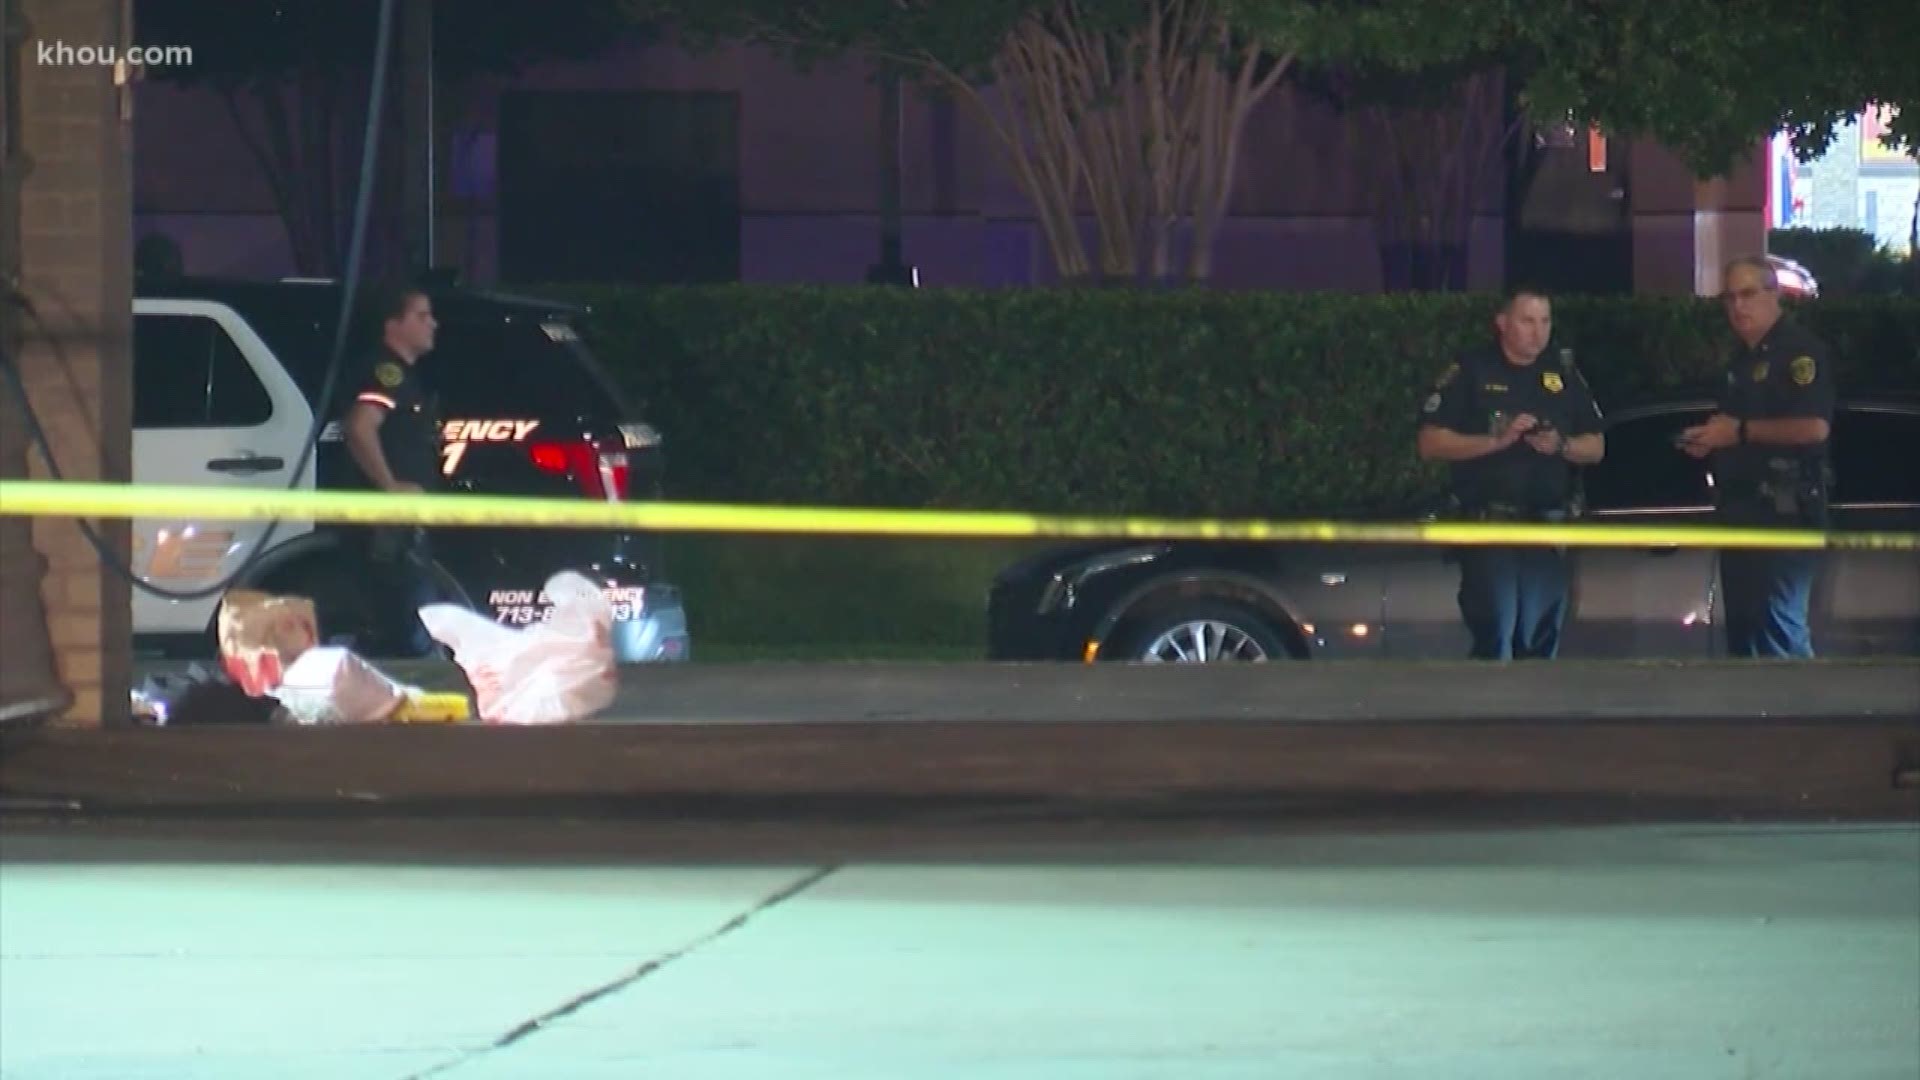 A pregnant woman was shot at a car wash in southwest Houston Monday evening, police said.